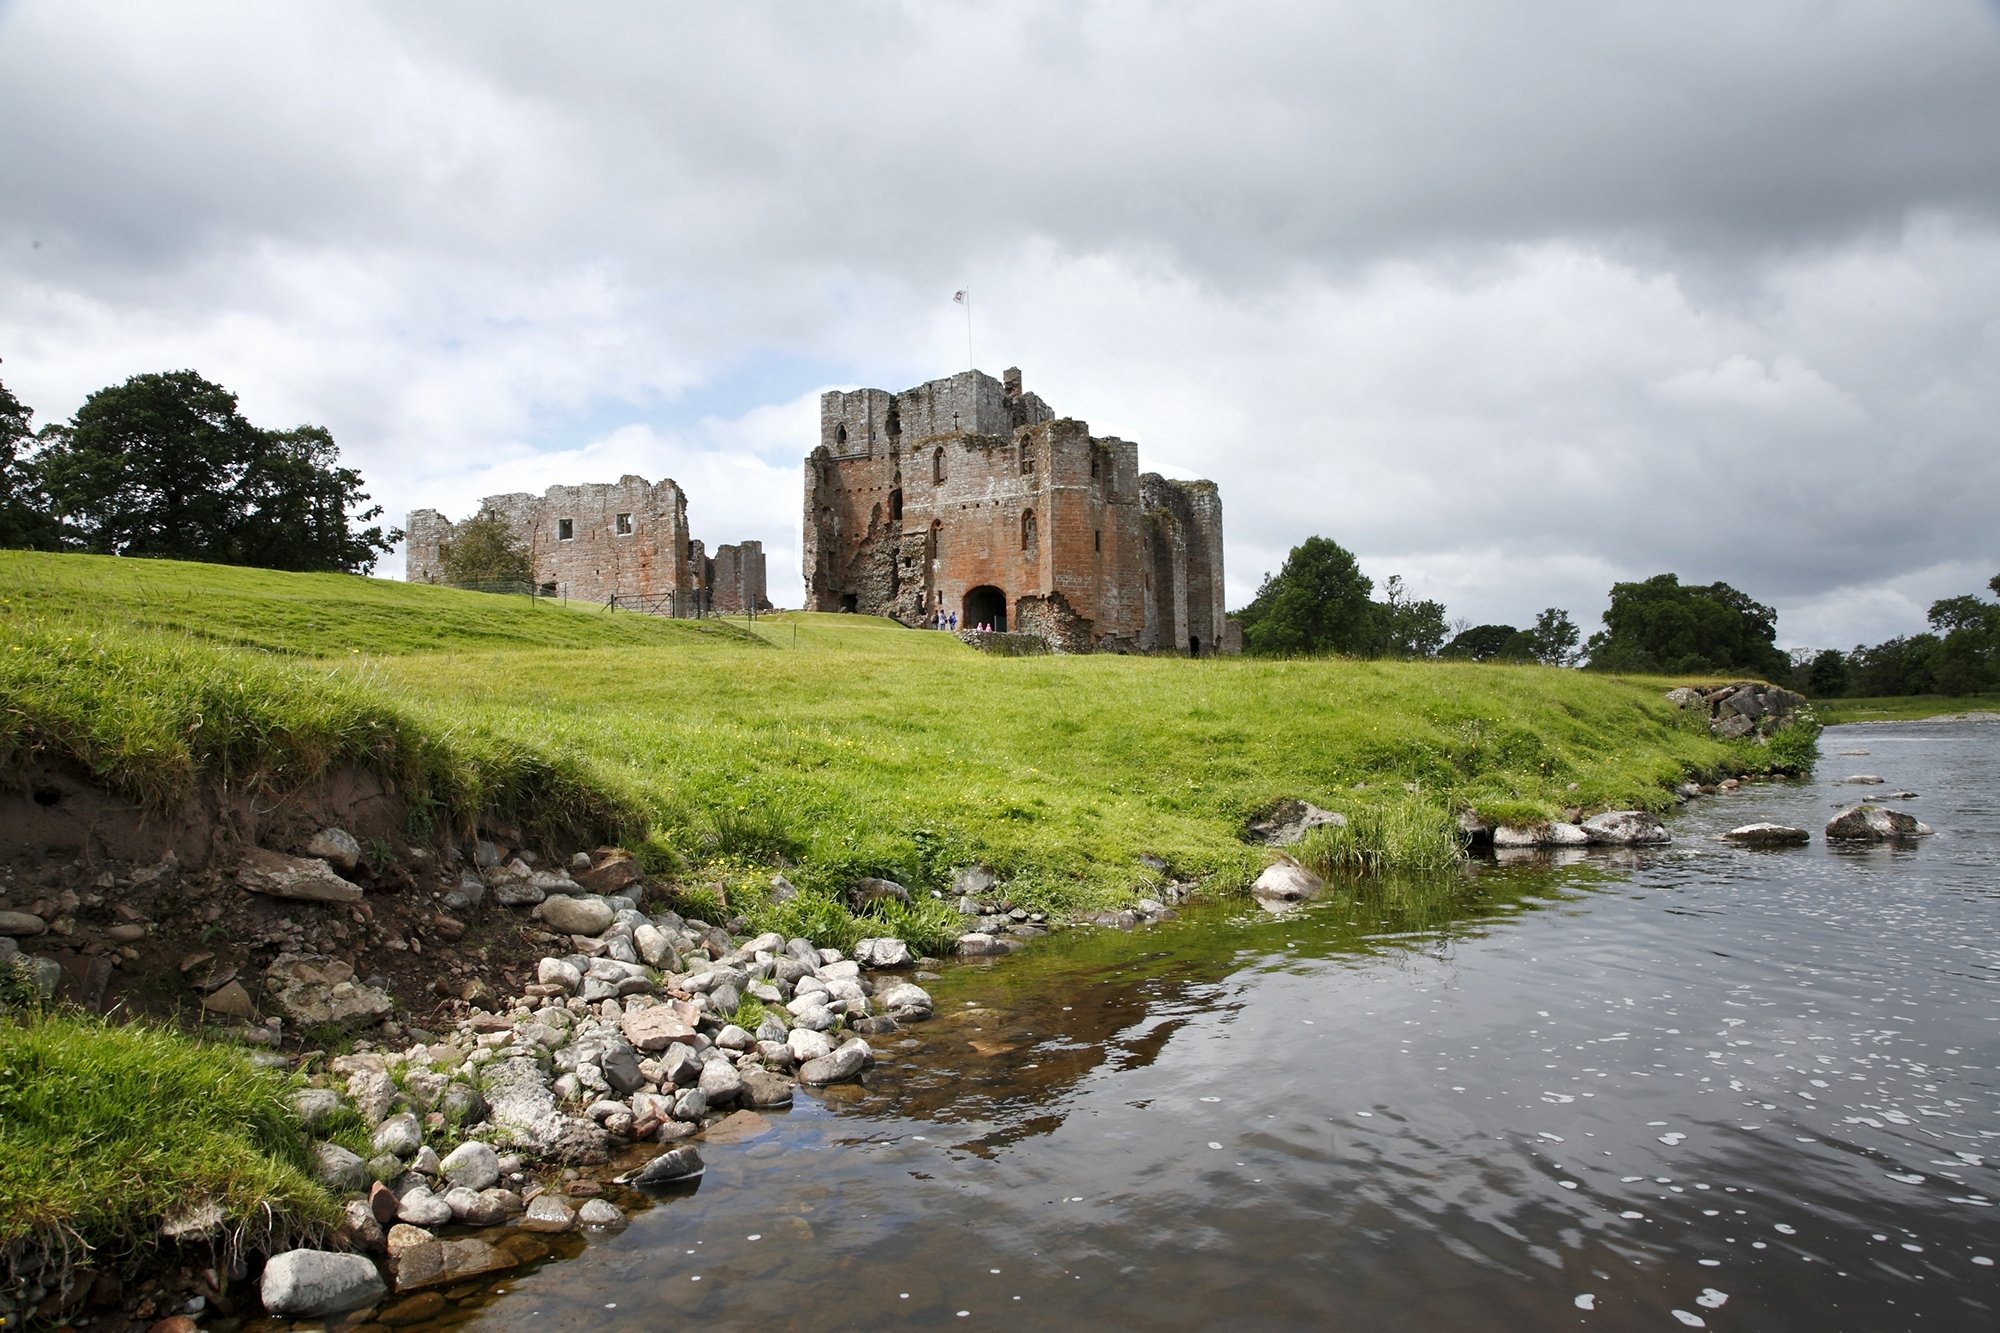 View of Brougham Castle from the river bed.